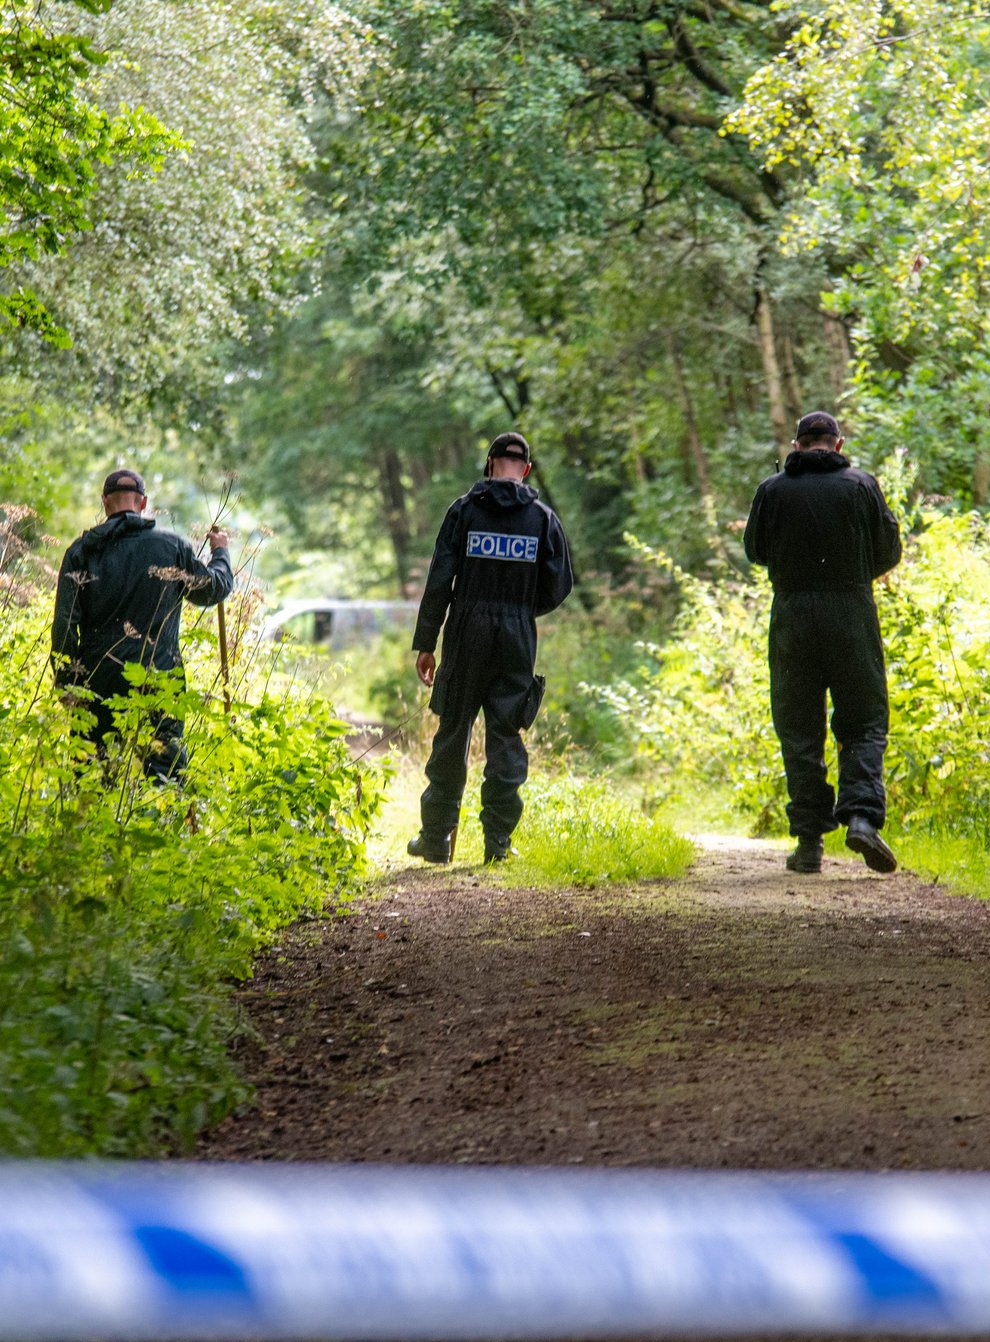 Police officers searching the land at Sand Hutton Gravel Pits near York in connection with the disappearance of missing university chef Claudia Lawrence. Ms Lawrence went missing 12 years ago and police believe she was murdered, although no body has ever been found.